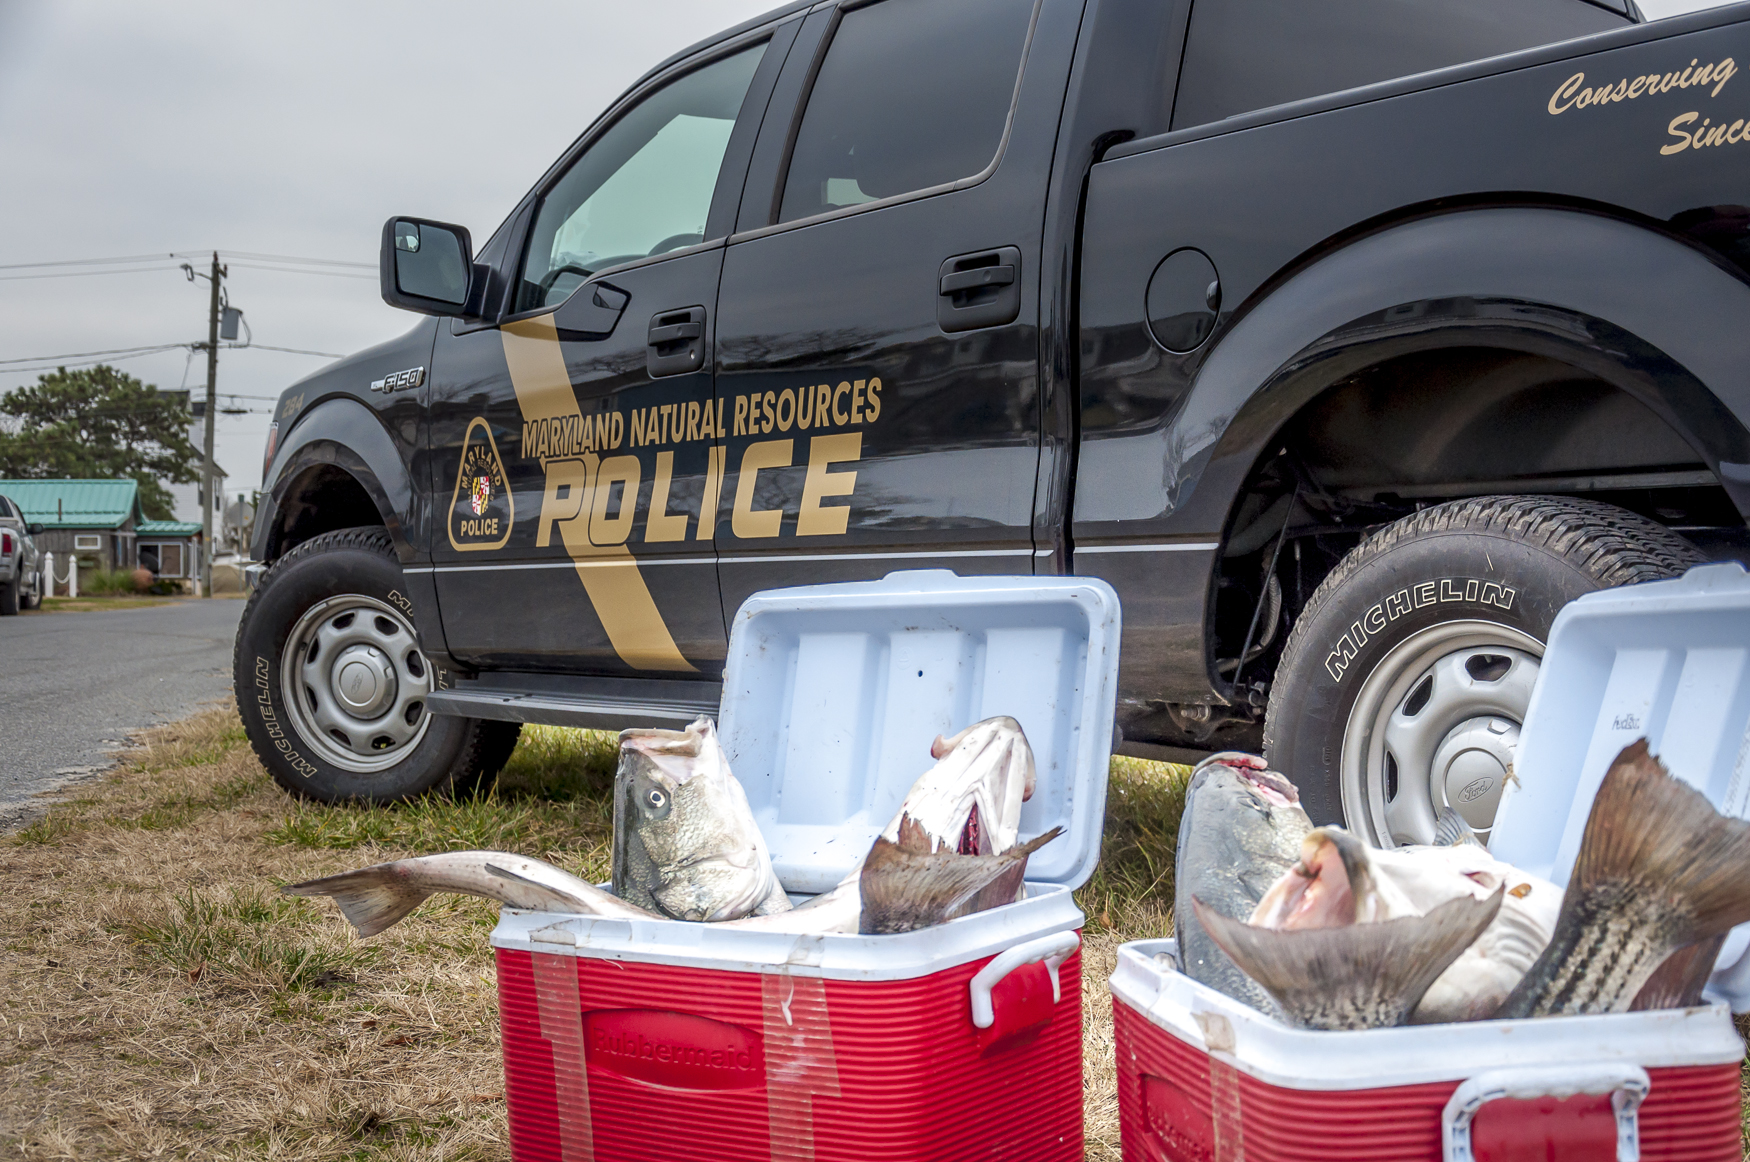 A cooler full of stripers caught illegally.